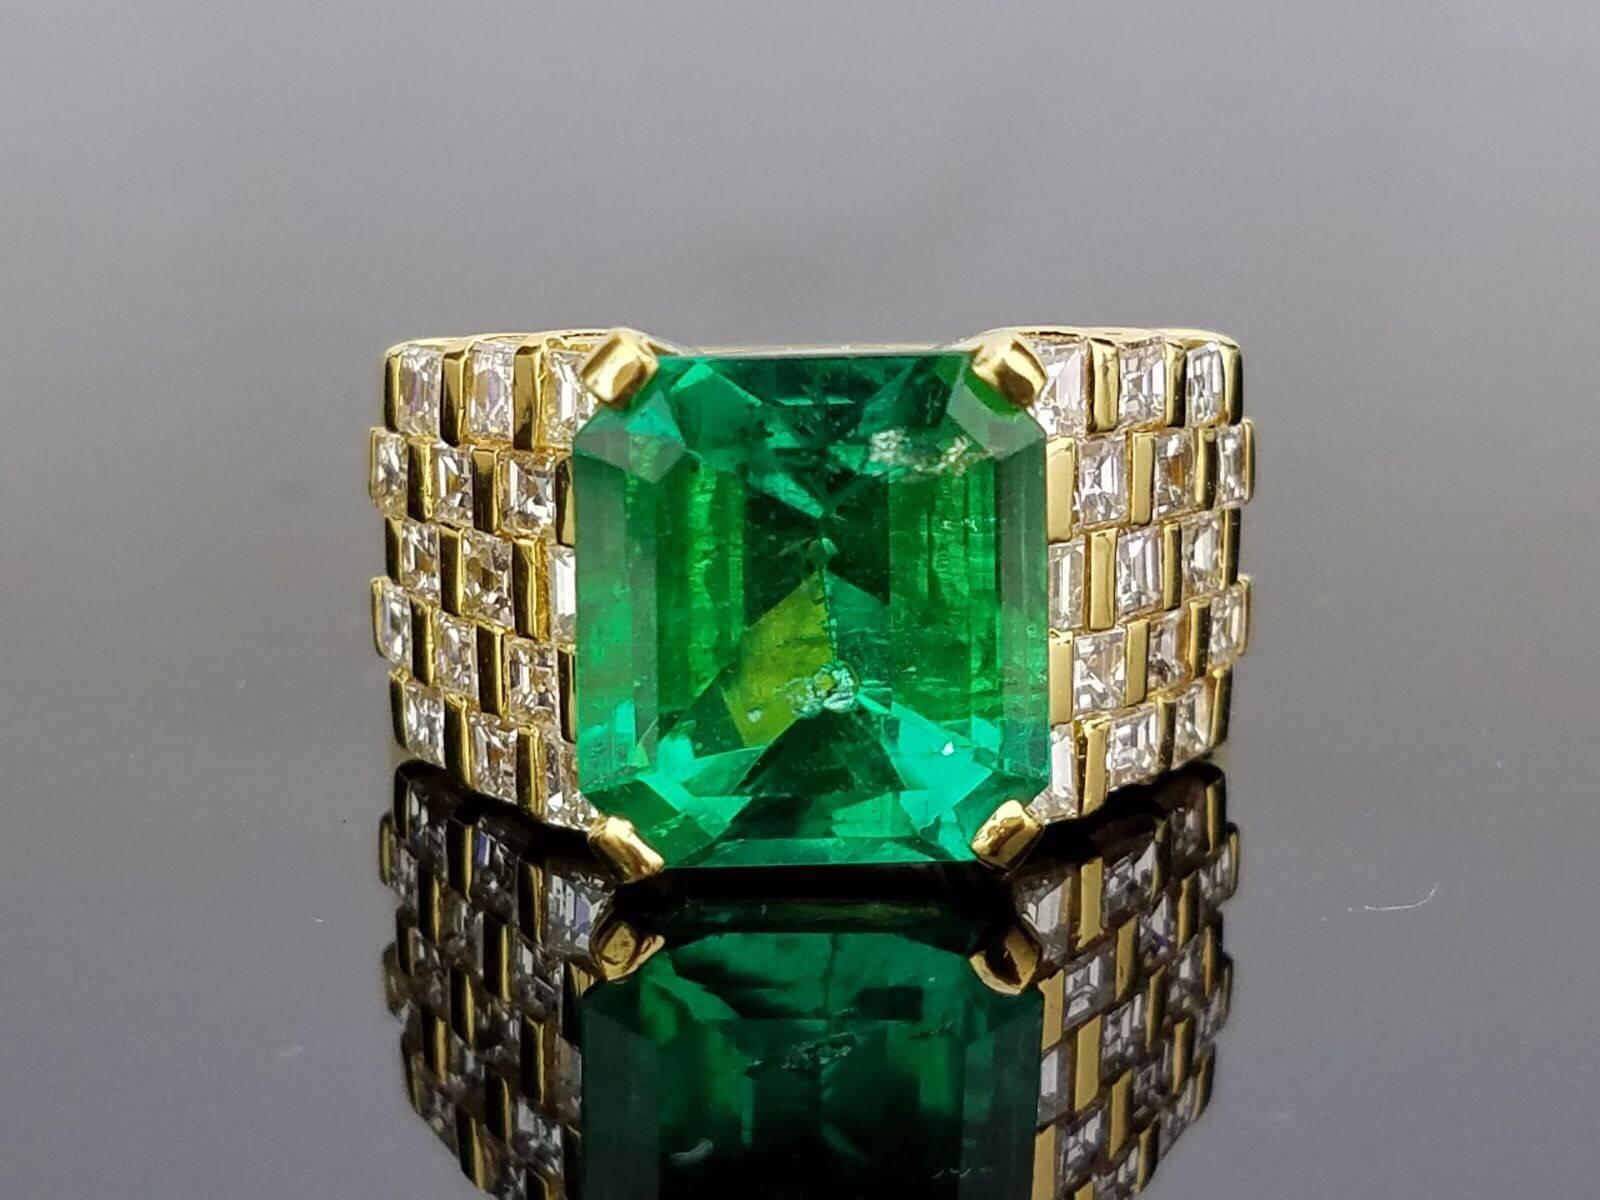 Beautiful Colombian Emerald and Diamond Ring set in 18K Gold 

Stone Details: 
Stone: Colombian Emerald
Cut: Emerald Cut
Carat Weight: 5.61 Carat
516359
Diamond Details:
Cut: Princess
Total Carat Weight: 1.82
Quality: VS , H/I

18K Gold: 11.73 grams